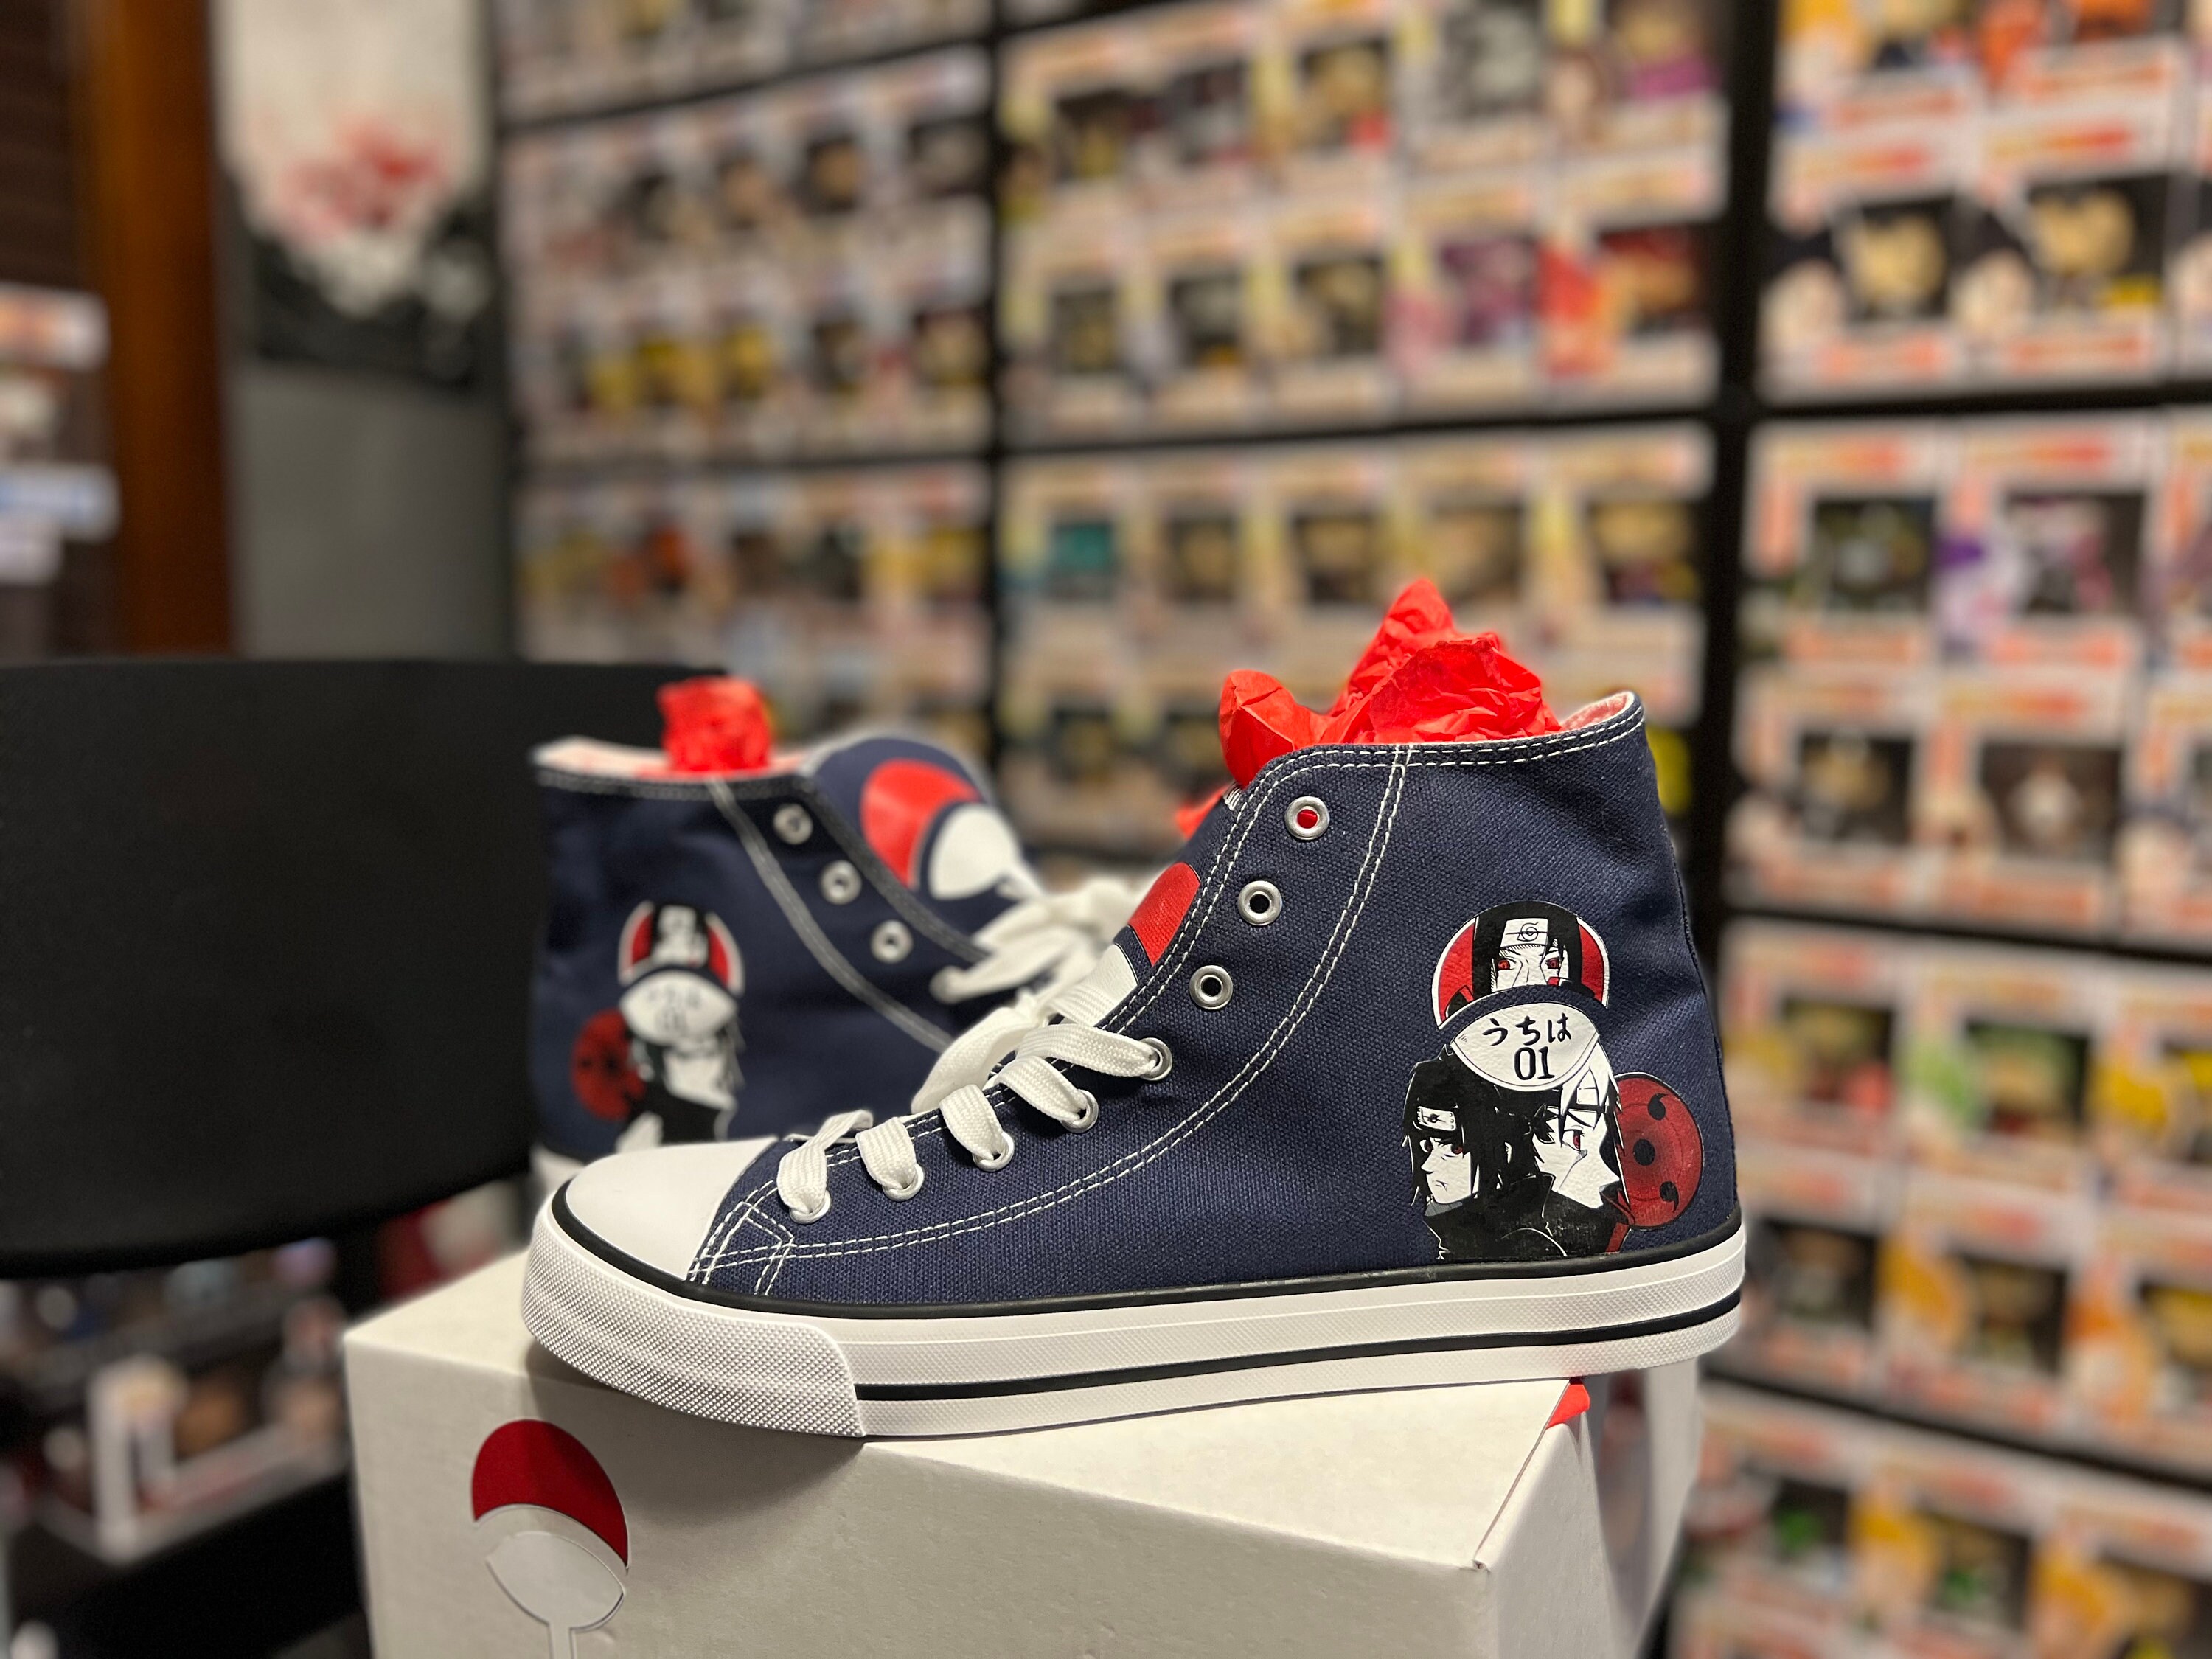 Anime Vans  Hand painted shoes Painted canvas shoes Painted shoes